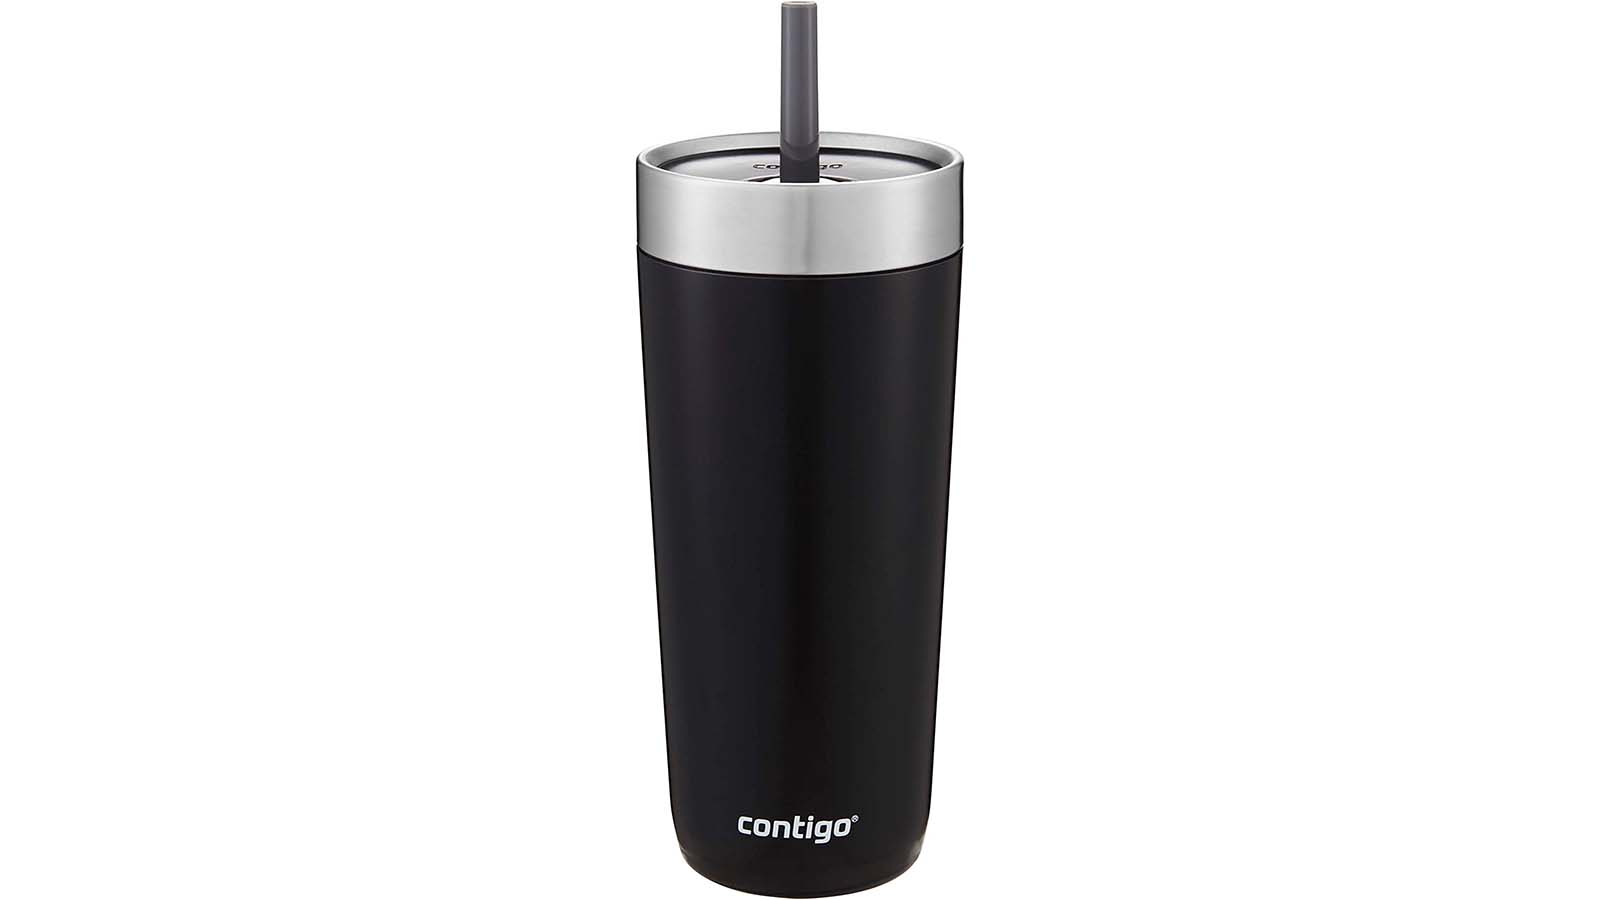 https://media.cnn.com/api/v1/images/stellar/prod/underscored-travelmug-contigo-luxe-stainless-steel-tumbler-with-spill-proof-lid-and-straw.jpg?q=h_900,w_1600,x_0,y_0